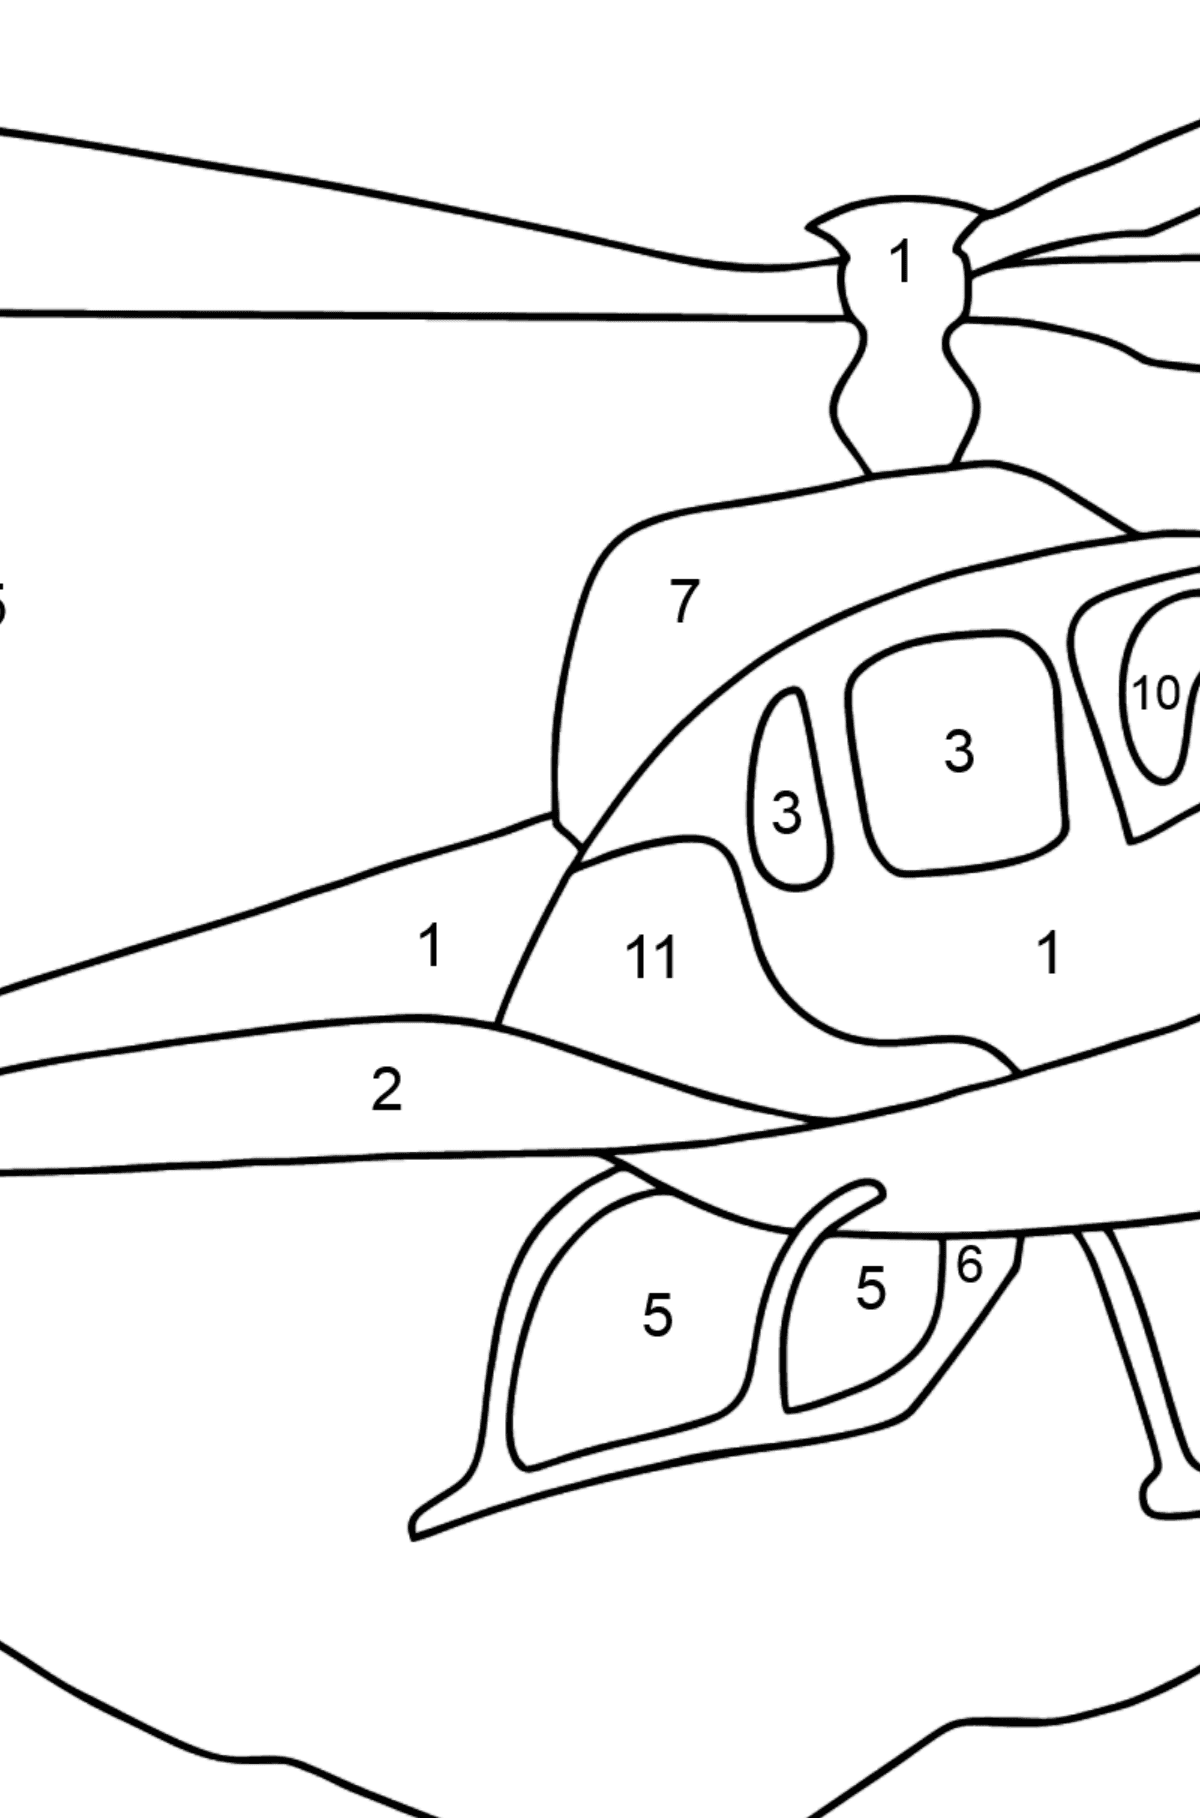 Coloring Page - A City Helicopter - Coloring by Numbers for Kids